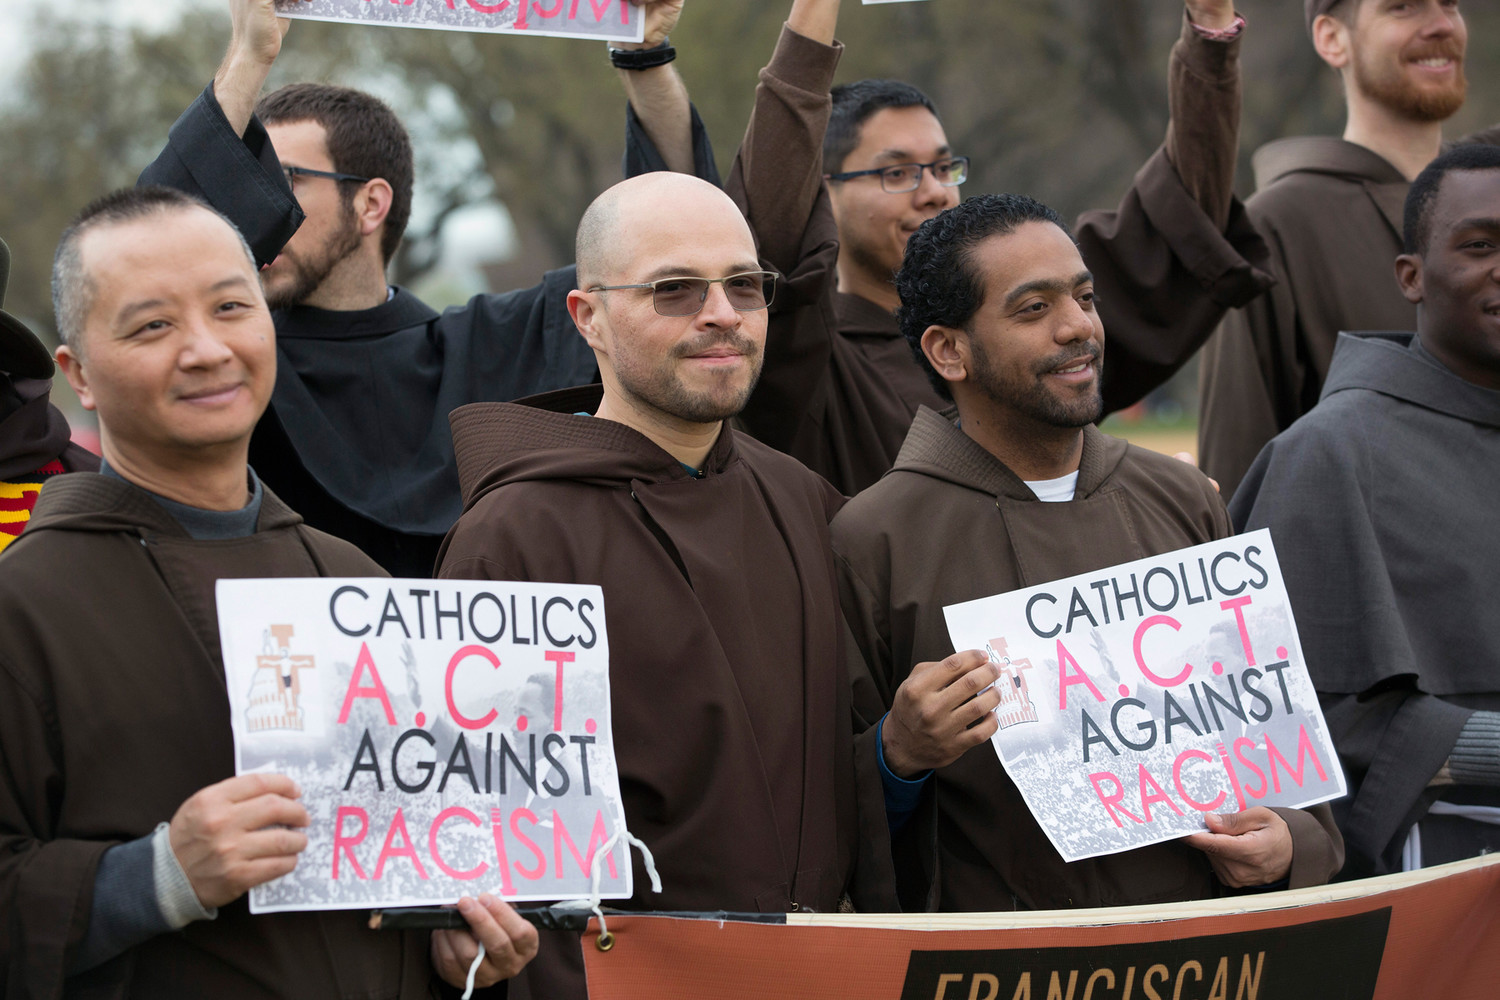 Franciscans hold signs during an “A.C.T. to End Racism” rally on the National Mall in Washington April 4. The rally marked the 50th anniversary of the assassination of civil rights leader the Rev. Martin Luther King Jr.